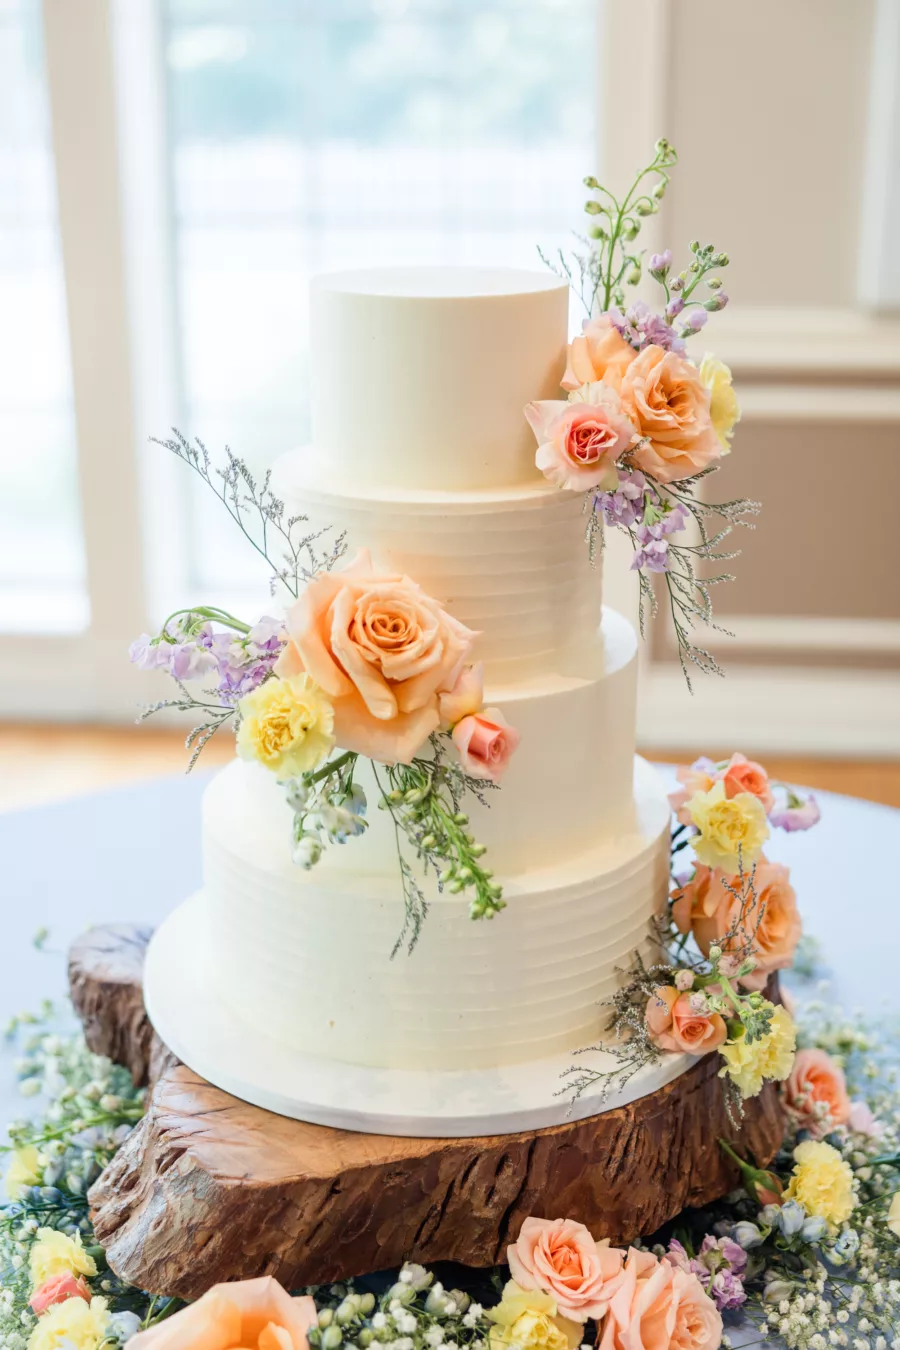 Round Four-Tiered Textured White Wedding Cake with Peach Roses, Yellow Carnations Flower Accent Ideas